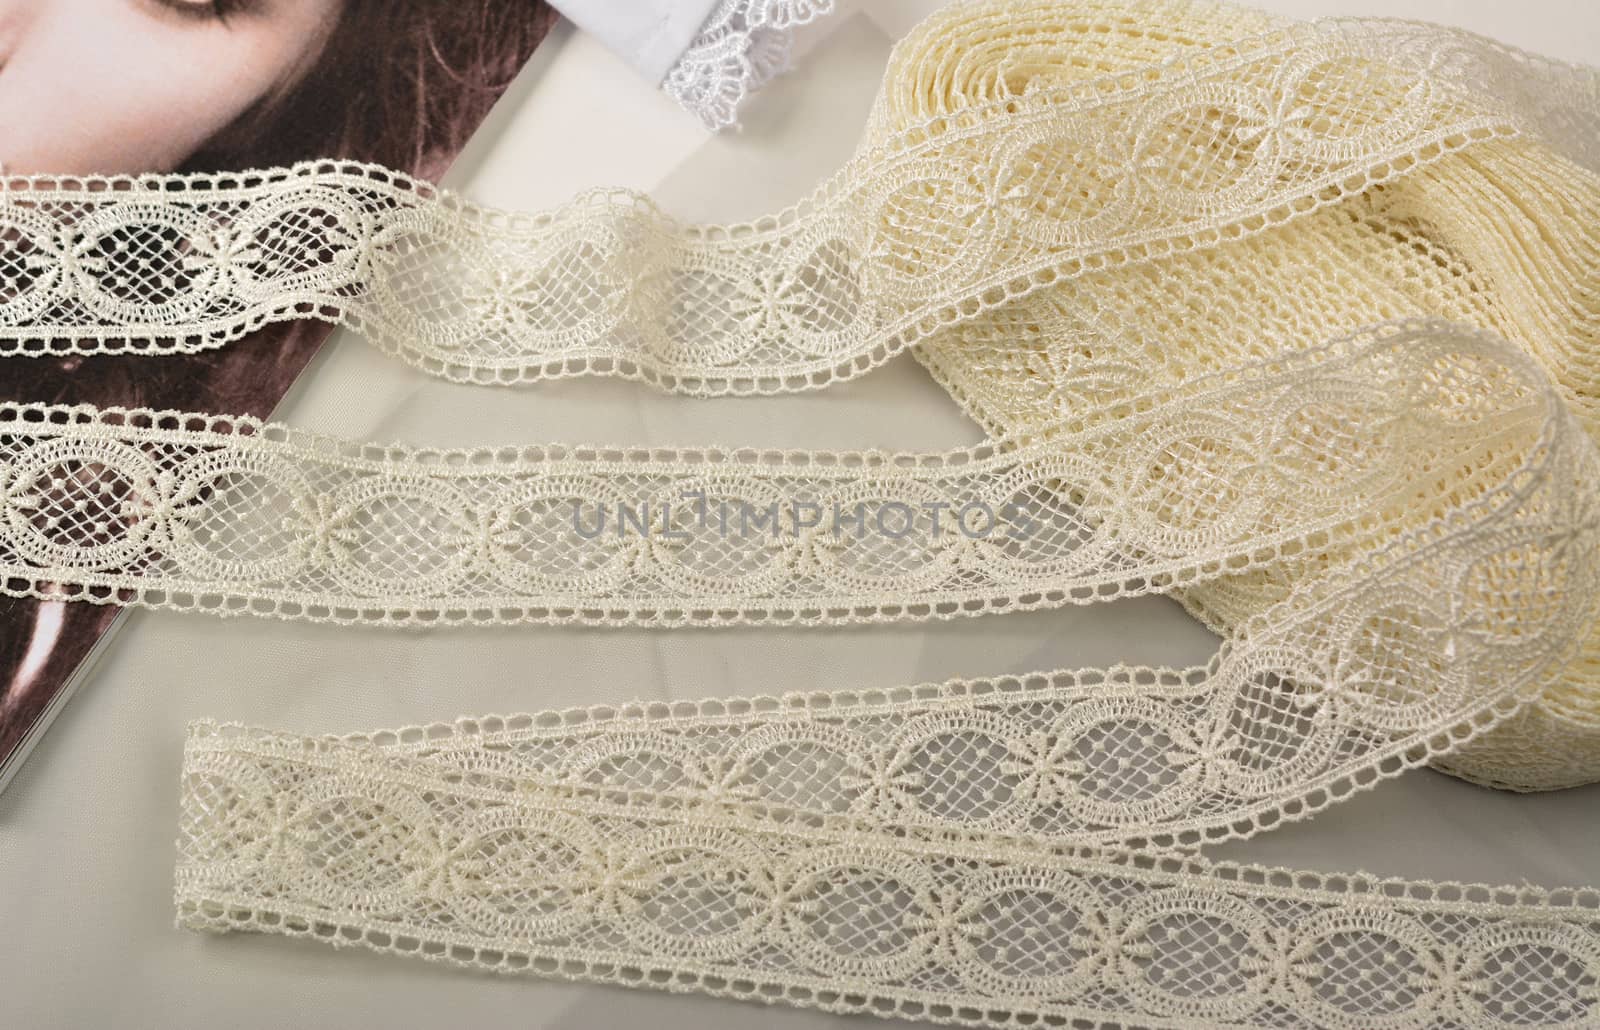 Tapes of ecru white guipure, beauty silk lace fabric on light background. Elastic material. Using for Atelier and needlework store. Flat lay style